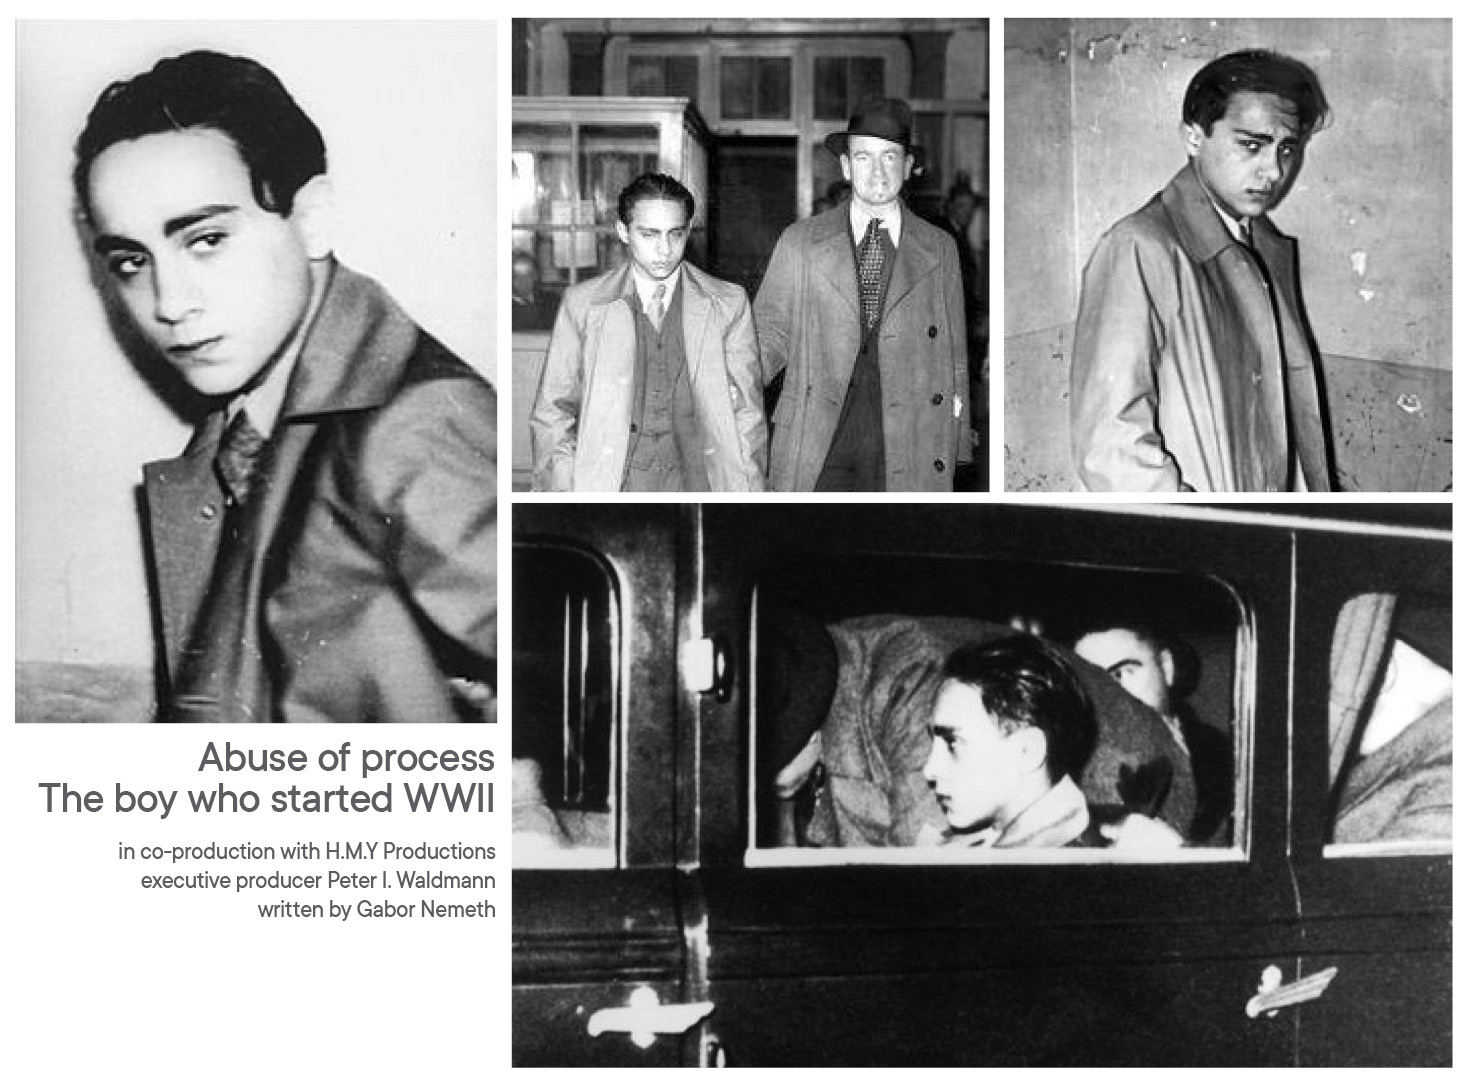 Abuse of process - The boy who started WWII